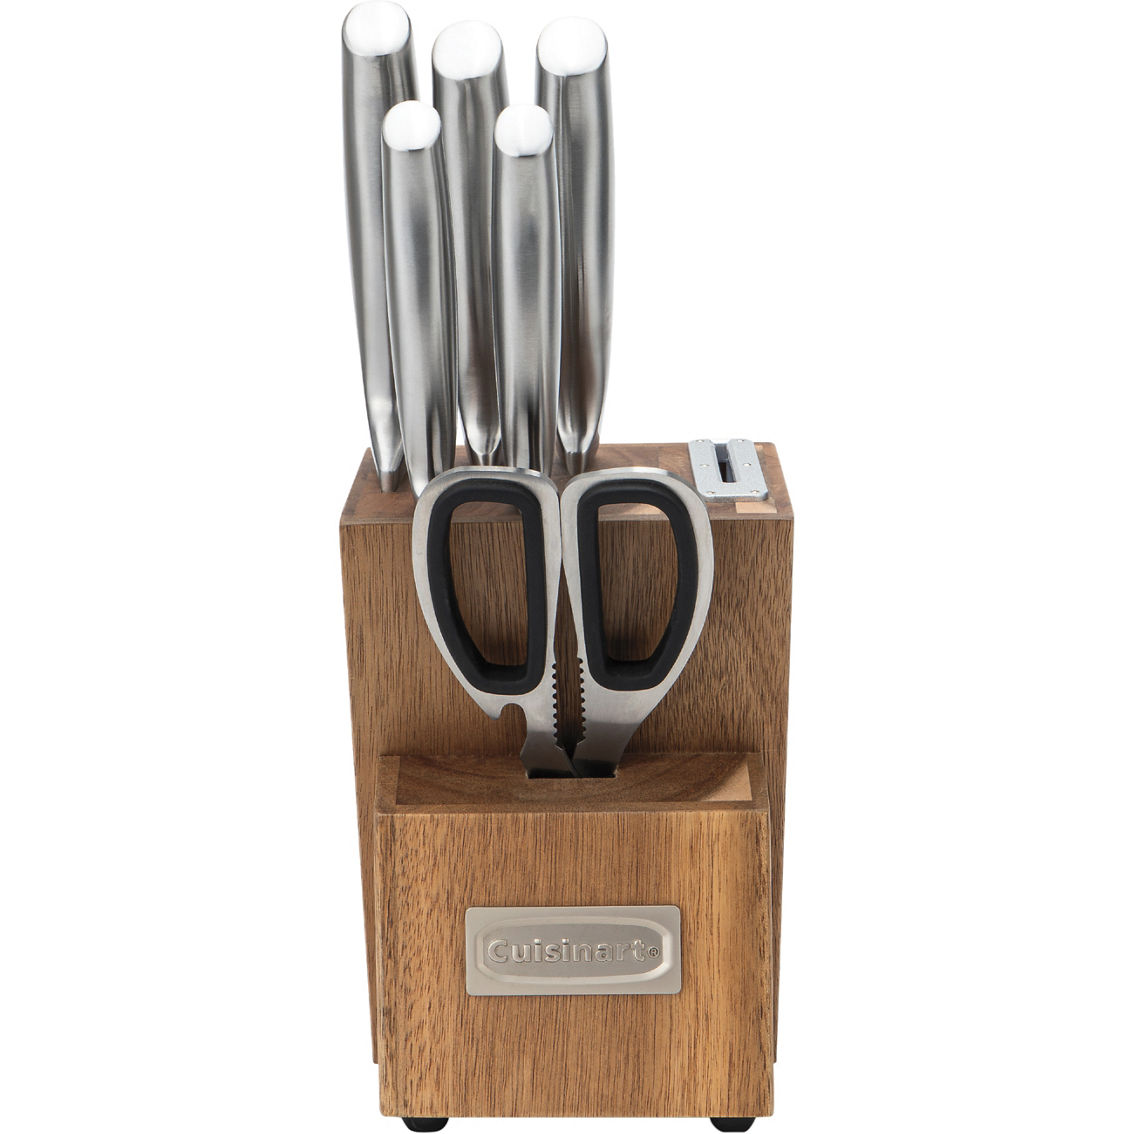 Cuisinart 7 pc. Stainless Steel Essentials Block Set with Built in Sharpener - Image 2 of 3